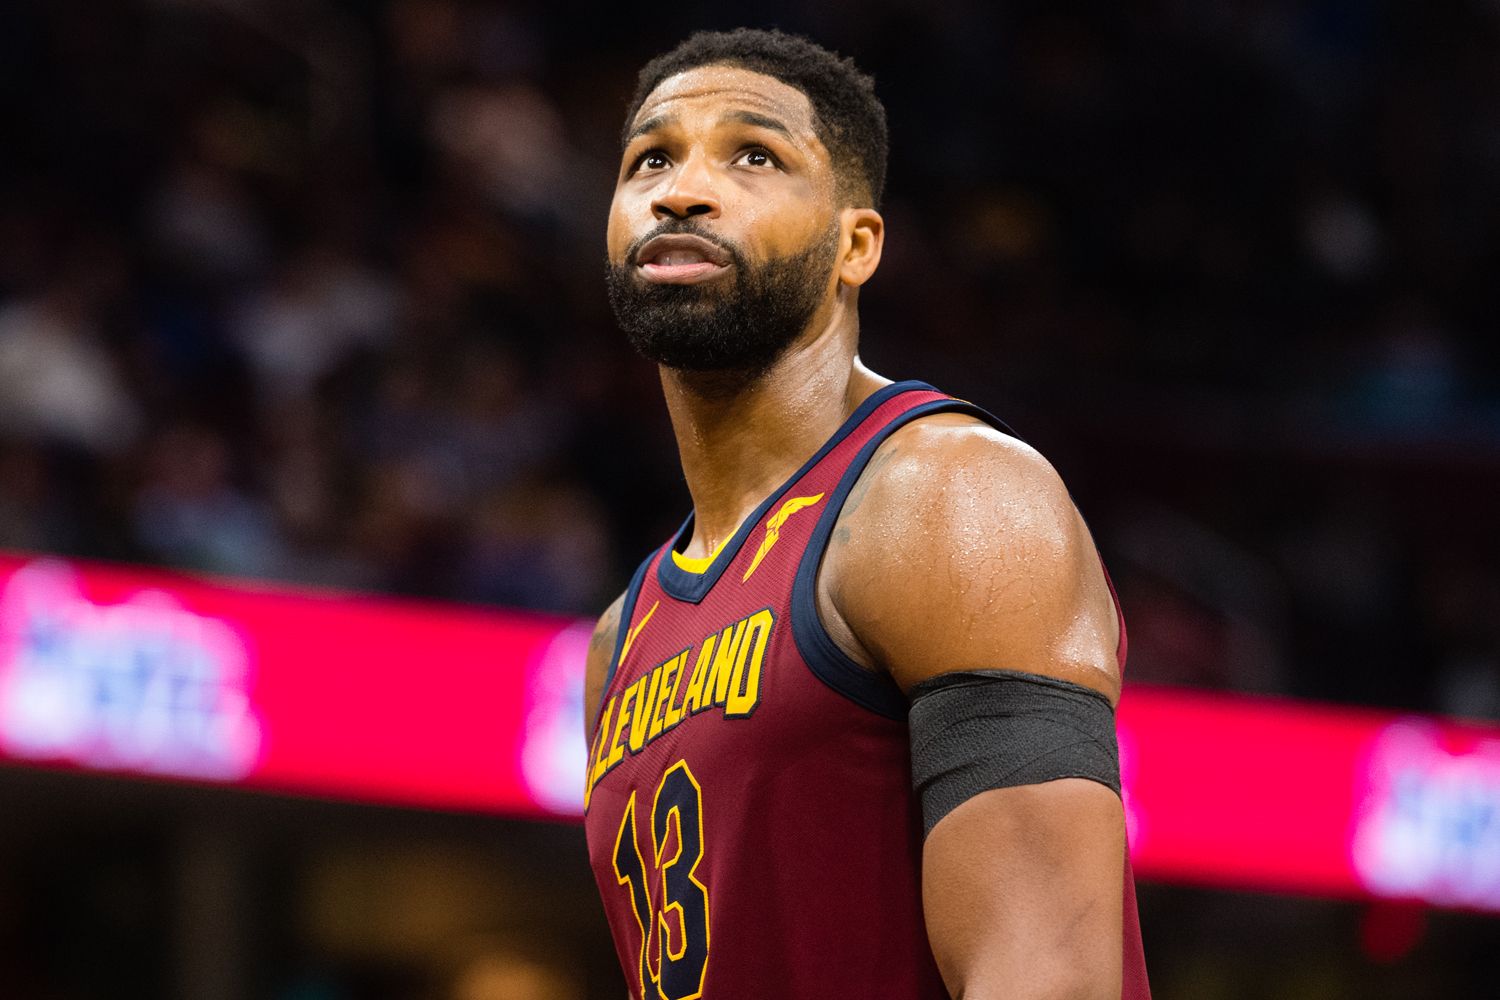 Cavs remove all images of Tristan Thompson from arena, online store